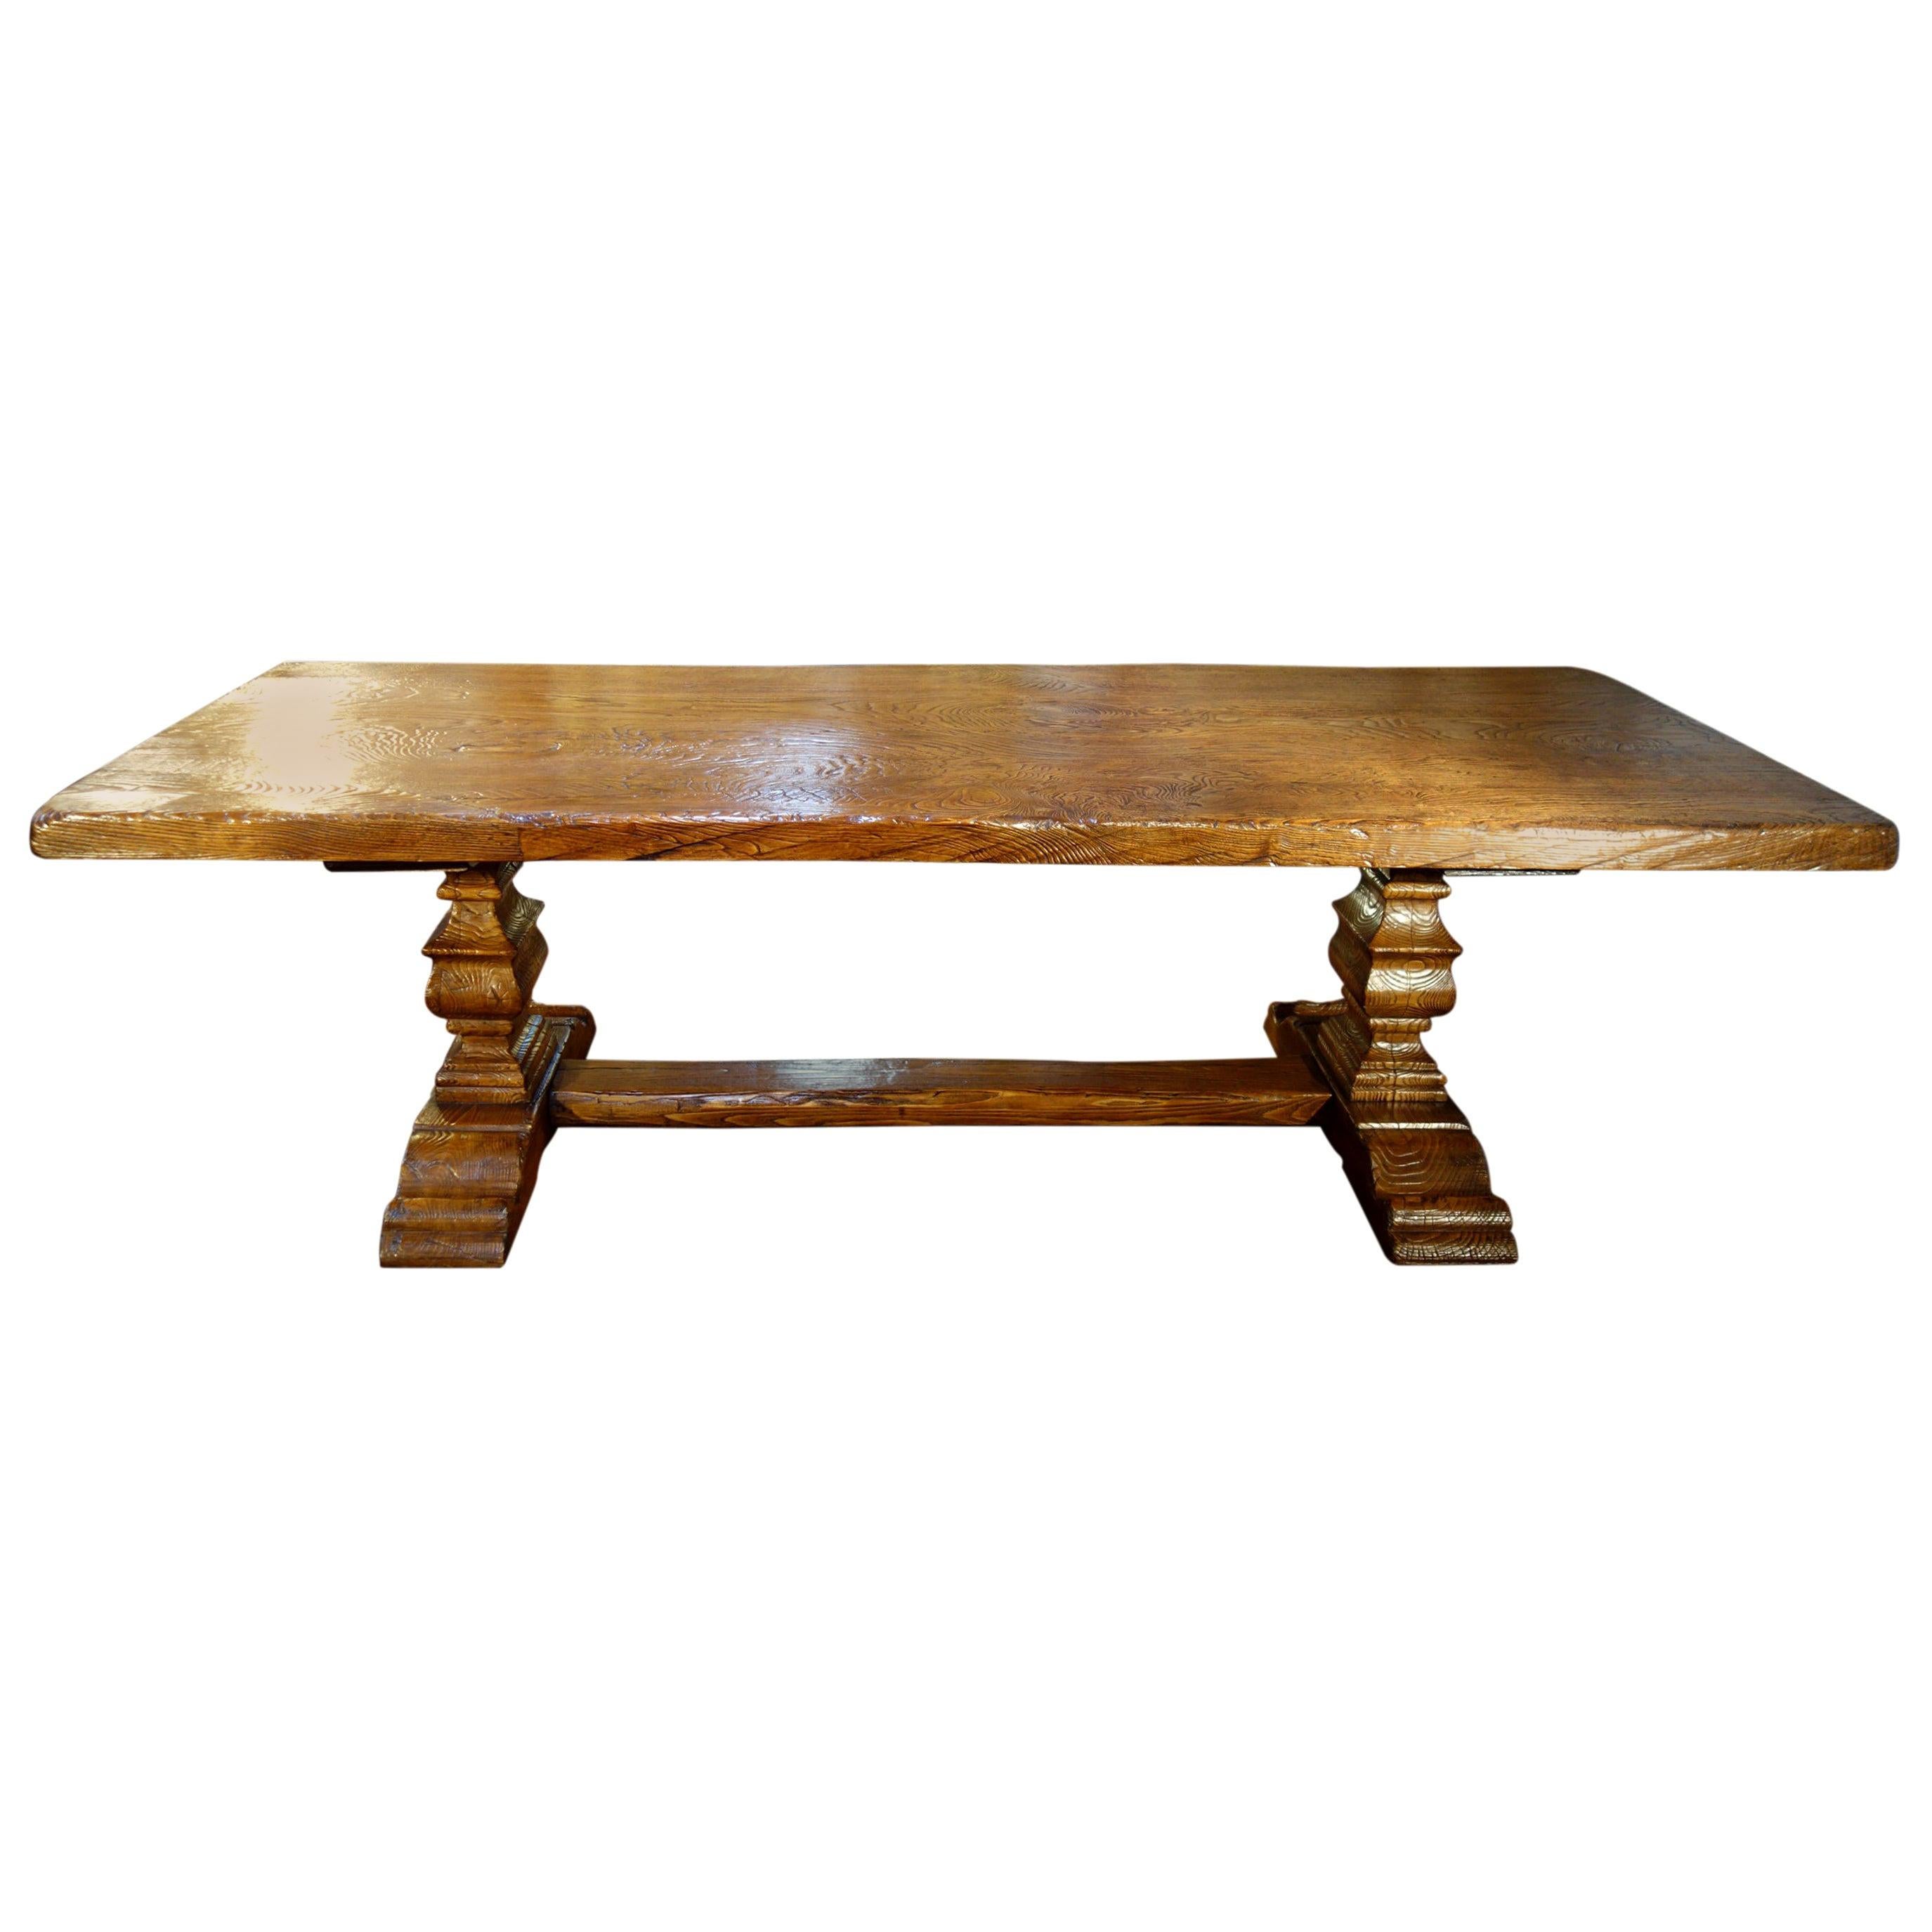 17th C Style Italian Solid Slab Chestnut Trestle Table Made to Order